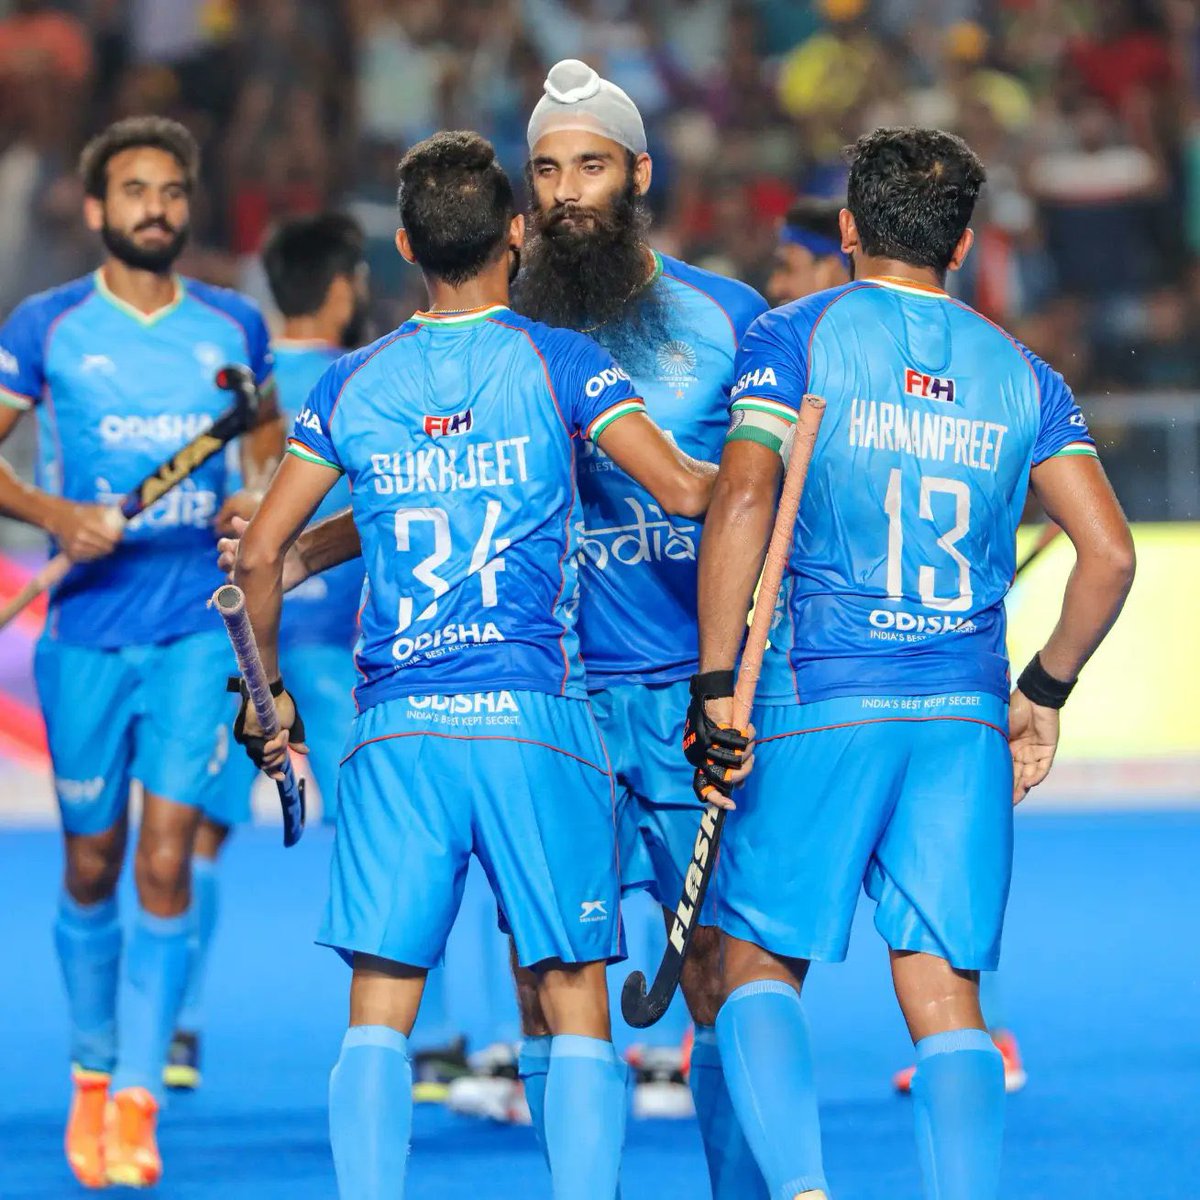 Congratulations #TeamIndia 🇮🇳 on winning the Hero Asian Champions Trophy in a thrilling final… Well played guys. Yeh hai #IndiaKaGame 🏑🏑🏑 @TheHockeyIndia